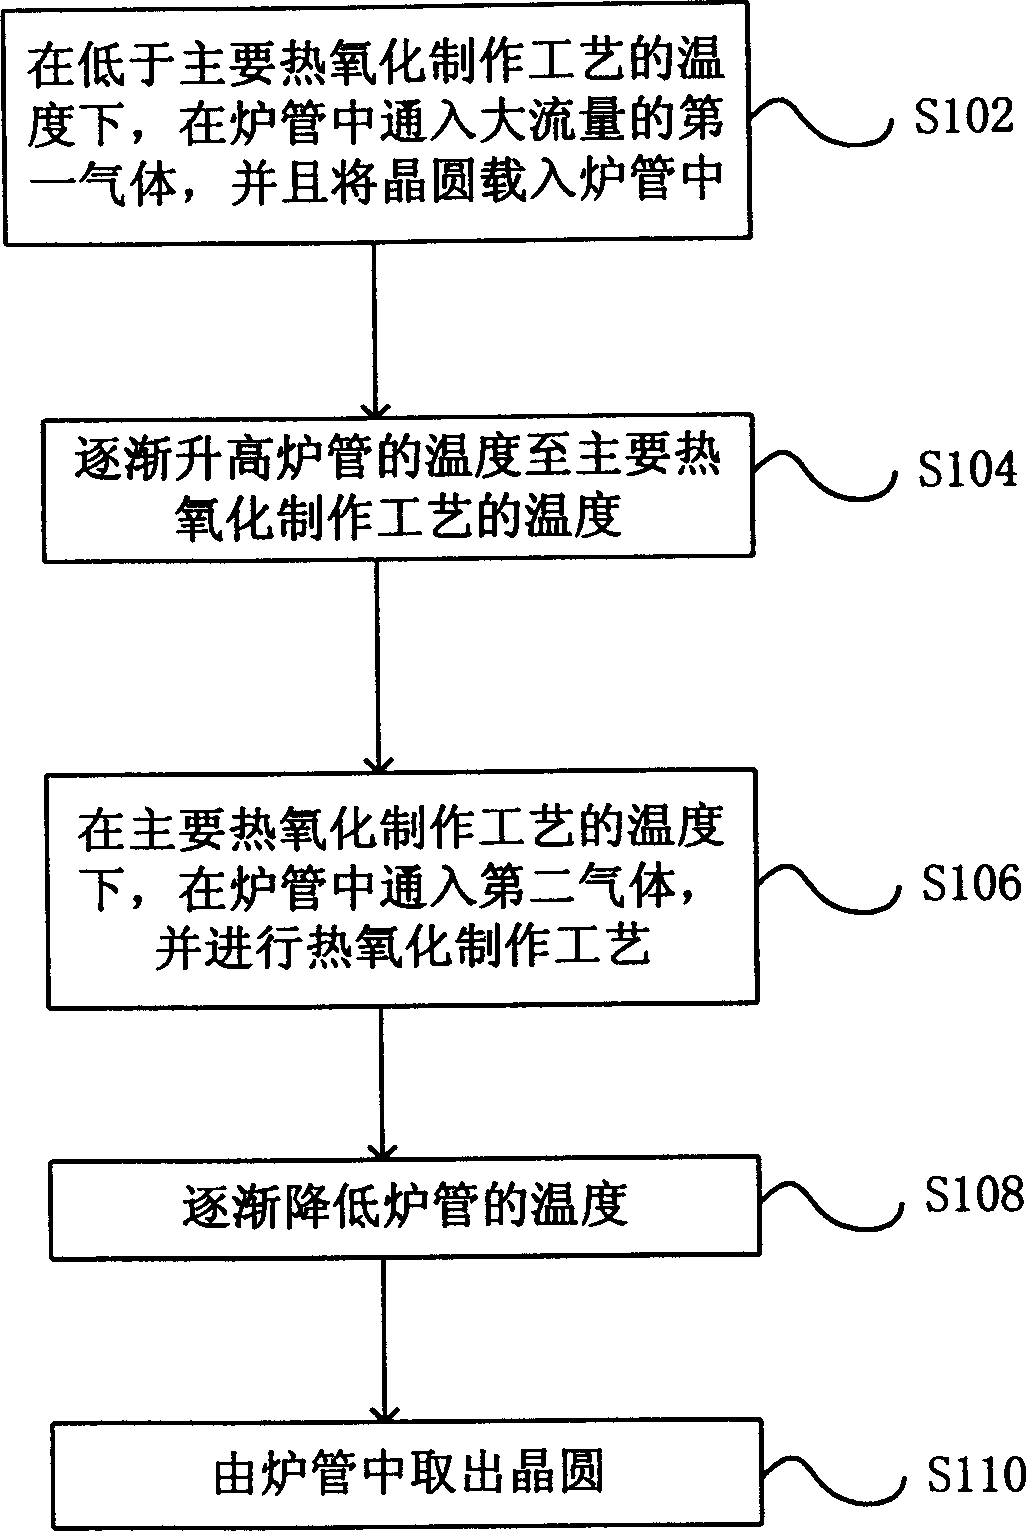 Thermal-oxidative production process of semiconductor wafer